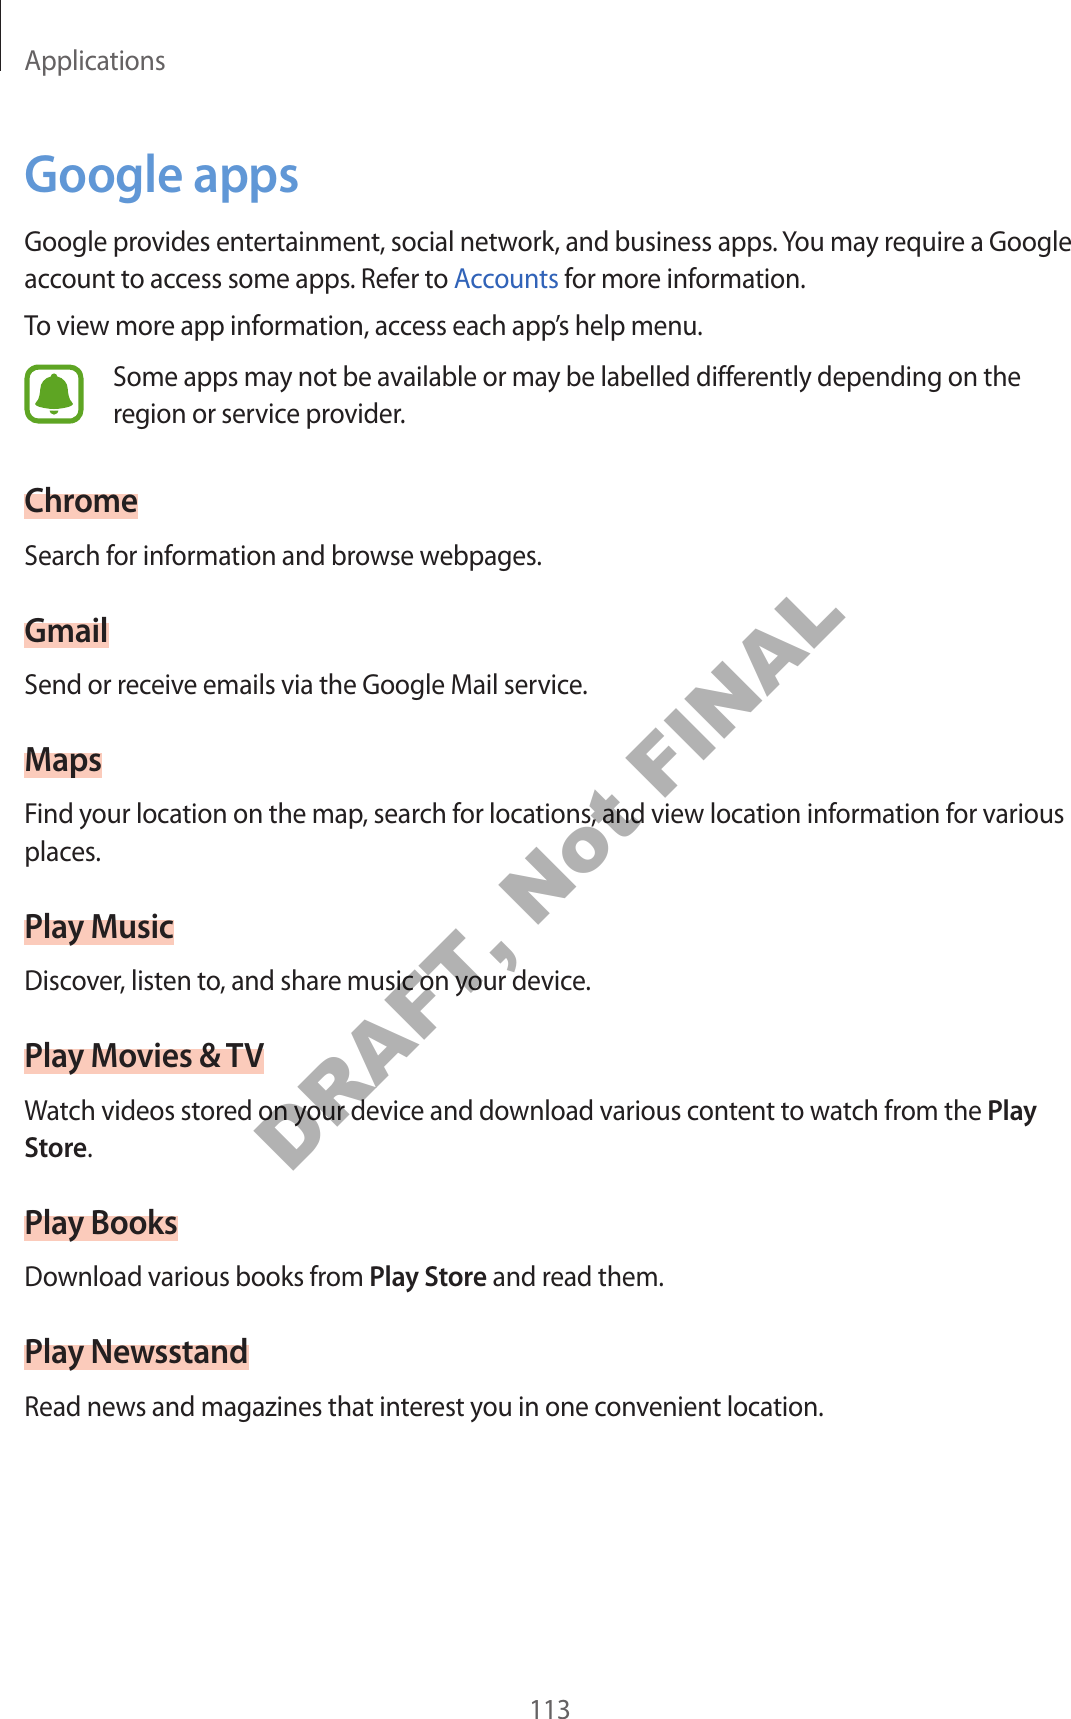 Applications113Google appsGoogle provides ent ertainment, social network, and business apps. You may requir e a Google account t o ac cess some apps . Ref er t o Accounts for mor e inf ormation.To view more app inf ormation, ac cess each app’s help menu.Some apps may not be available or ma y be labelled diff er en tly depending on the region or service provider.ChromeSearch for information and browse w ebpages .GmailSend or receiv e emails via the Google Mail service.MapsF ind y our loca tion on the map, search f or locations , and view location information for various places.Play MusicDiscov er, listen to, and share music on your devic e .Play Mo vies &amp; TVWatch videos stor ed on y our device and do wnload various c ont ent t o wat ch fr om the Play Store.Play BooksDownload various books from Play St or e and read them.Play Ne w sstandRead news and magazines that inter est y ou in one c on v enien t location.DRAFT, Not FINAL